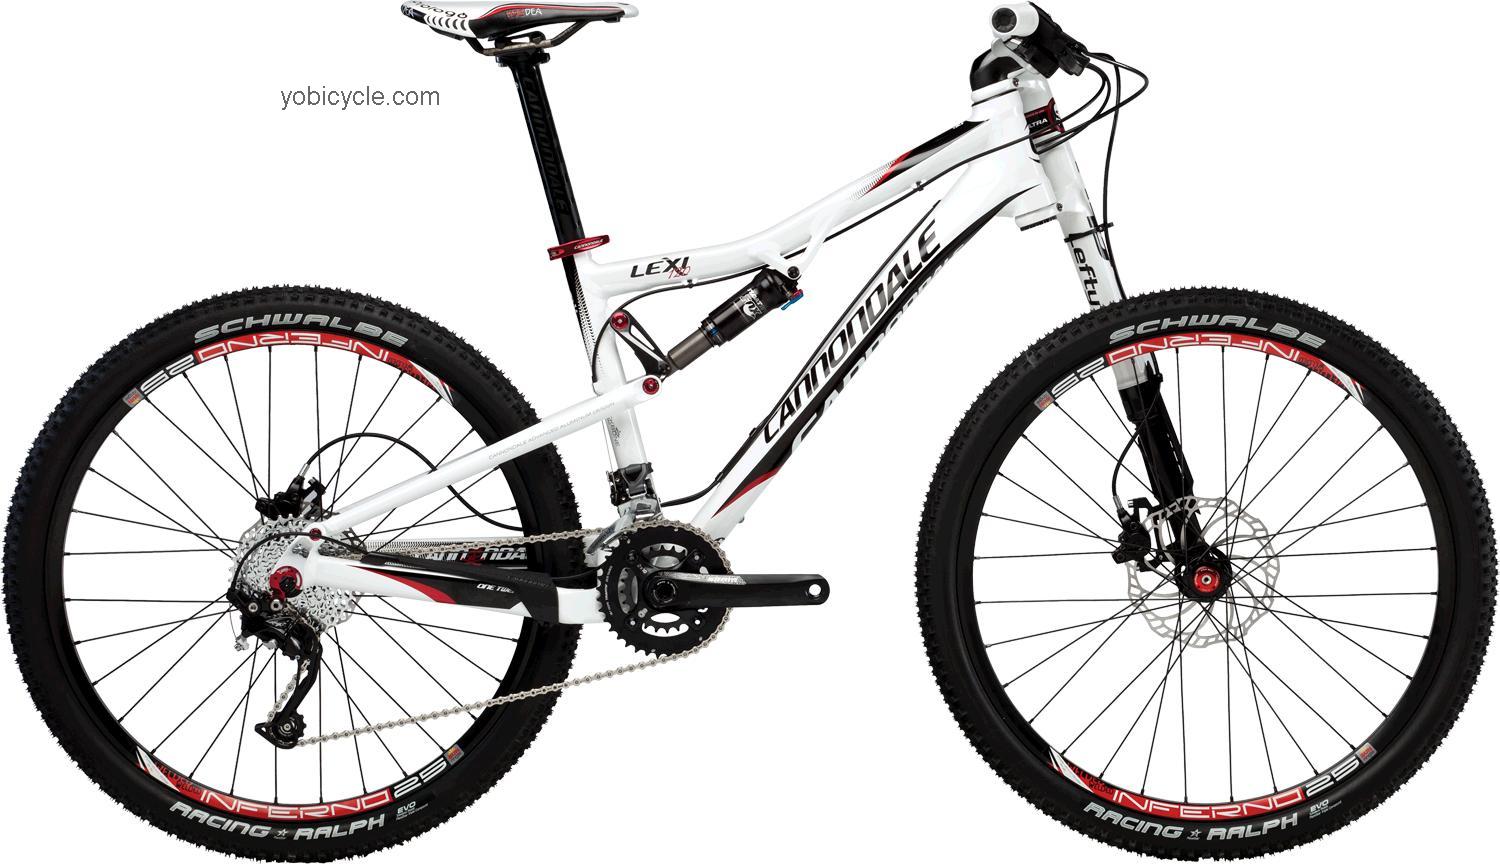 Cannondale Lexi 1 competitors and comparison tool online specs and performance